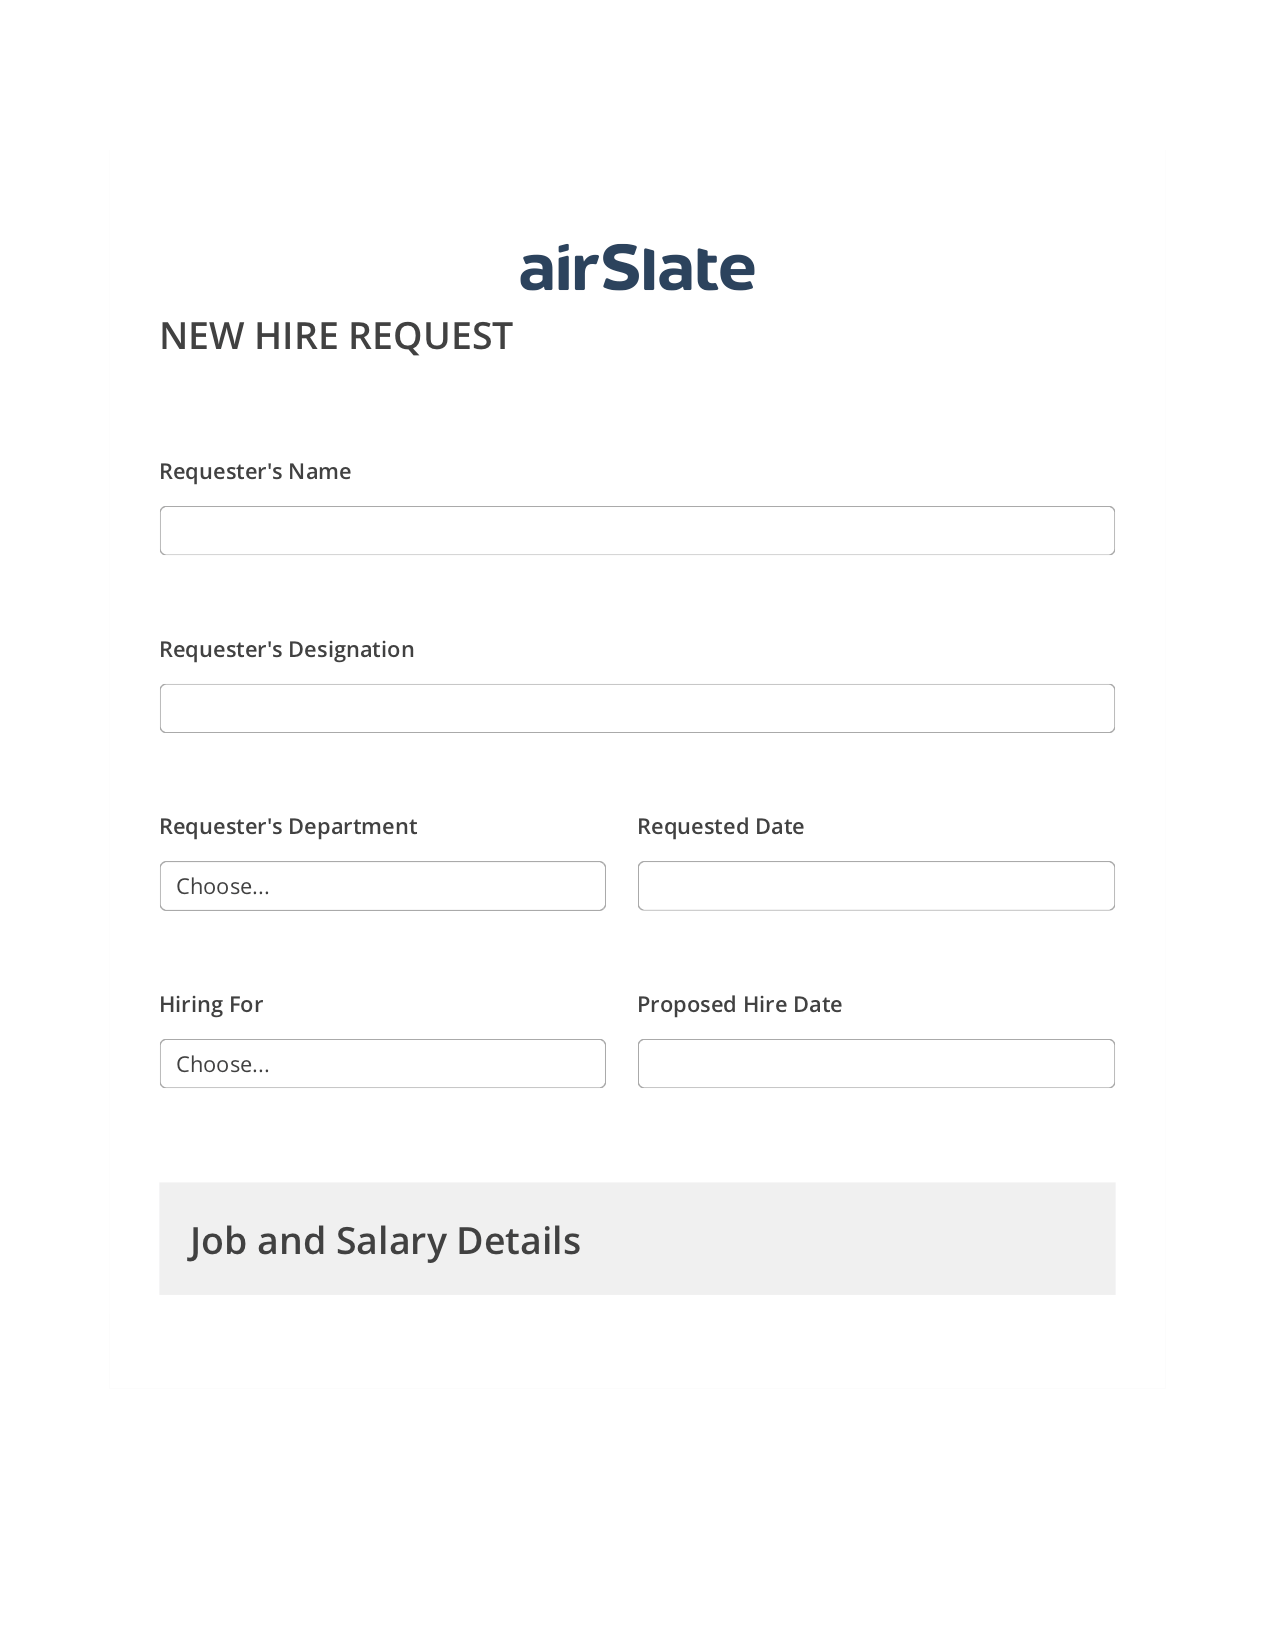 Hiring Request Workflow Pre-fill Dropdowns from Excel Bot, Update NetSuite Record Bot, Text Message Notification Postfinish Bot